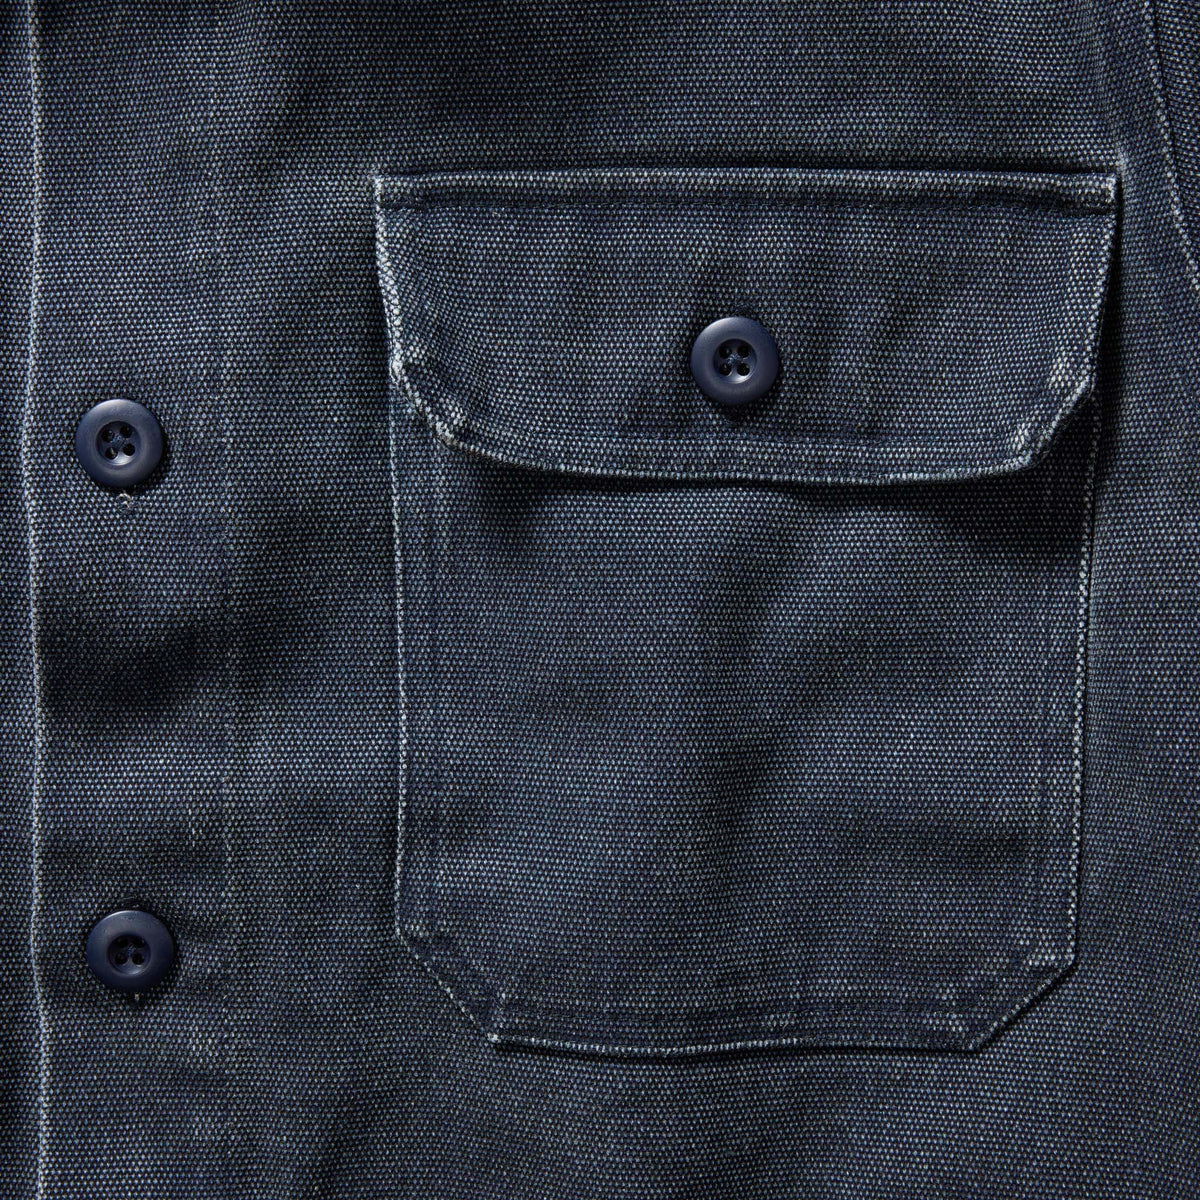 The Shop Shirt in Navy Chipped Canvas